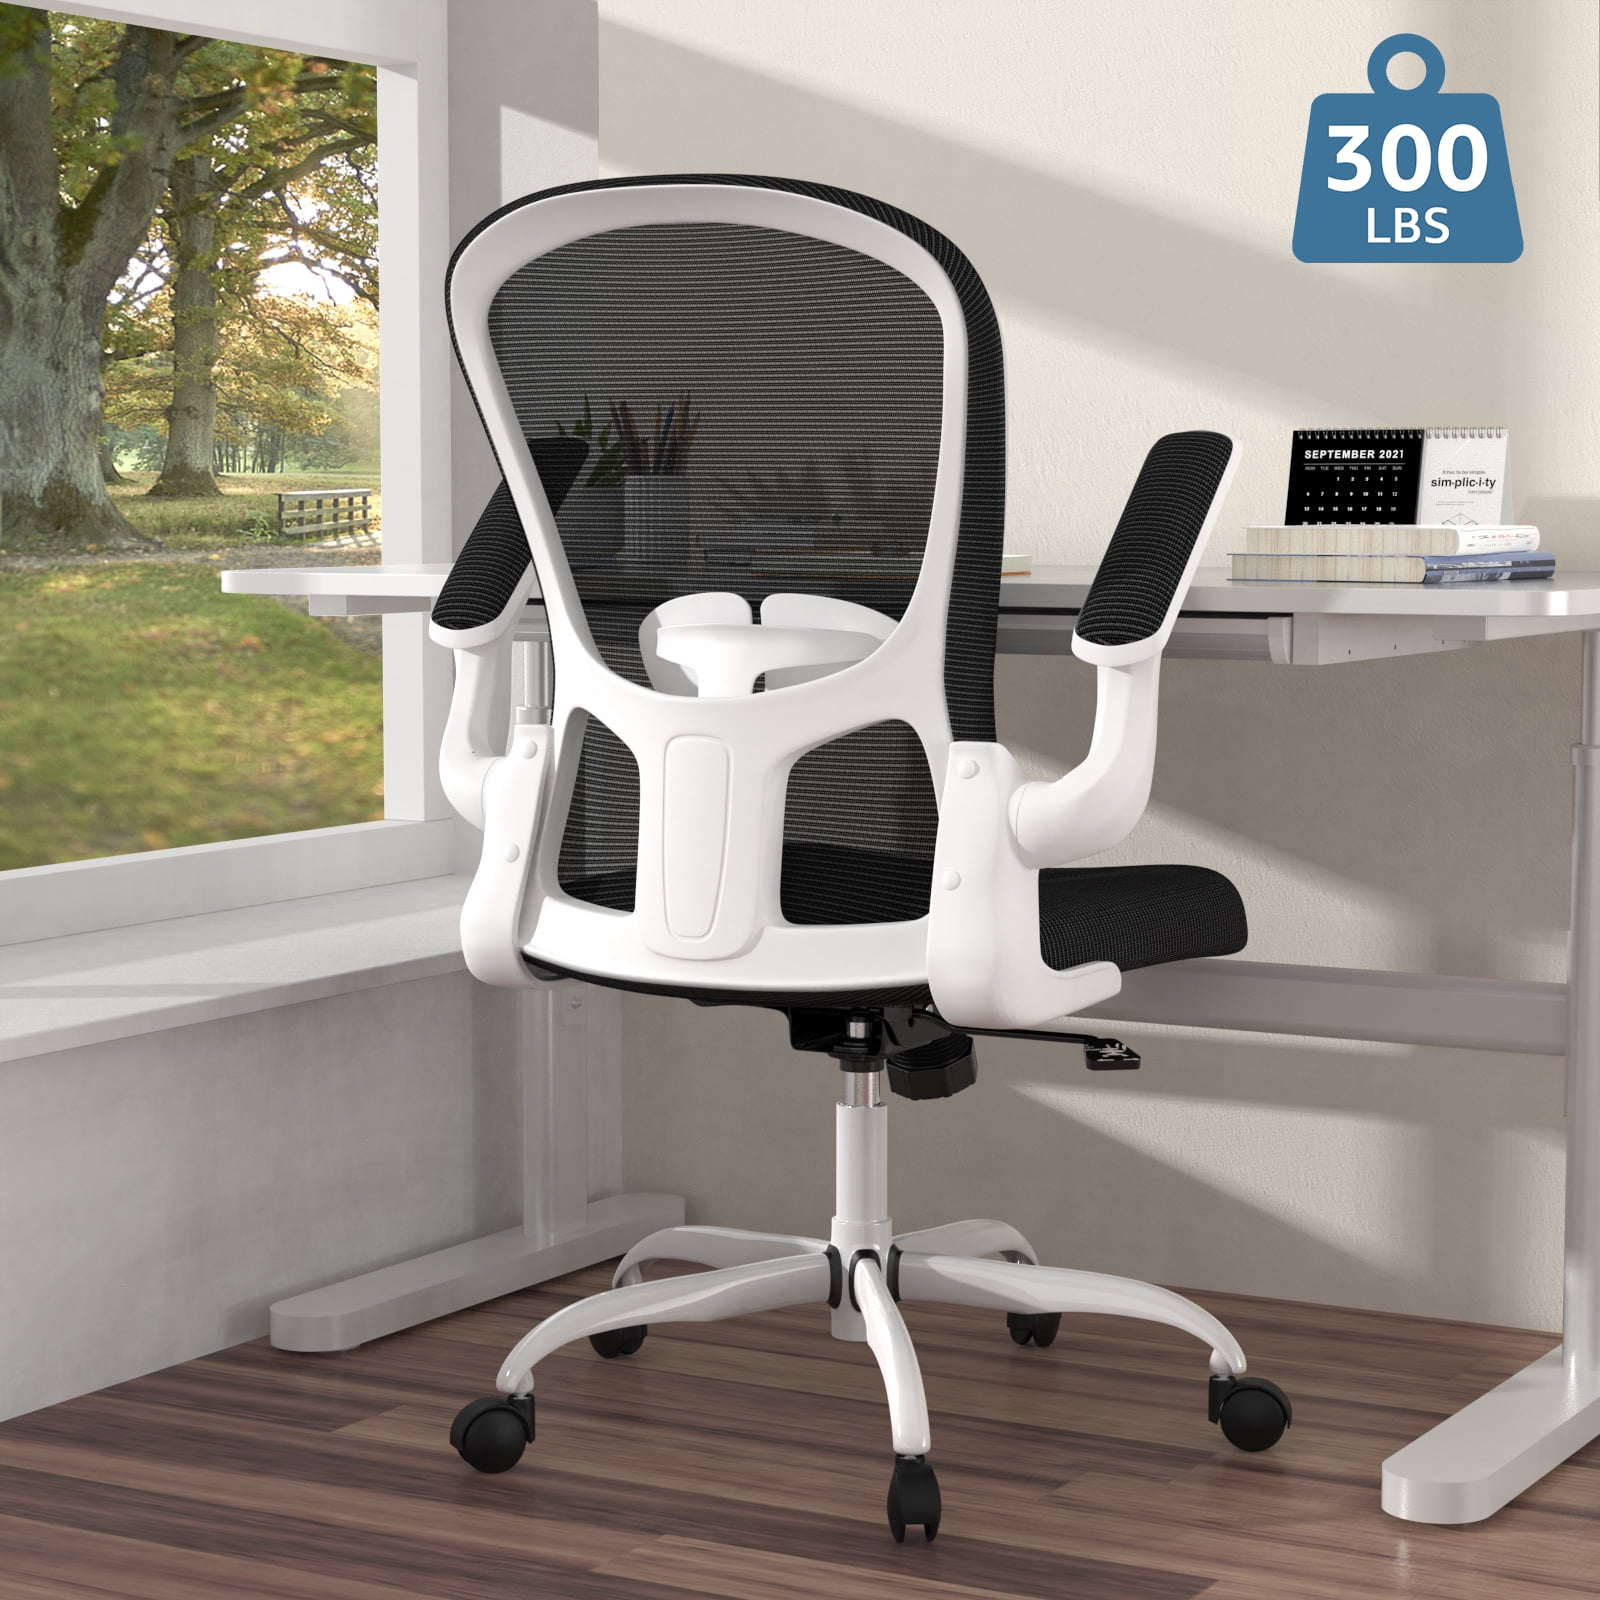 Ergonomic Office Chair, Comfort Home Office Task Chair, Lumbar Support Computer Chair with Flip-up Arms and Adjustable Height(White)